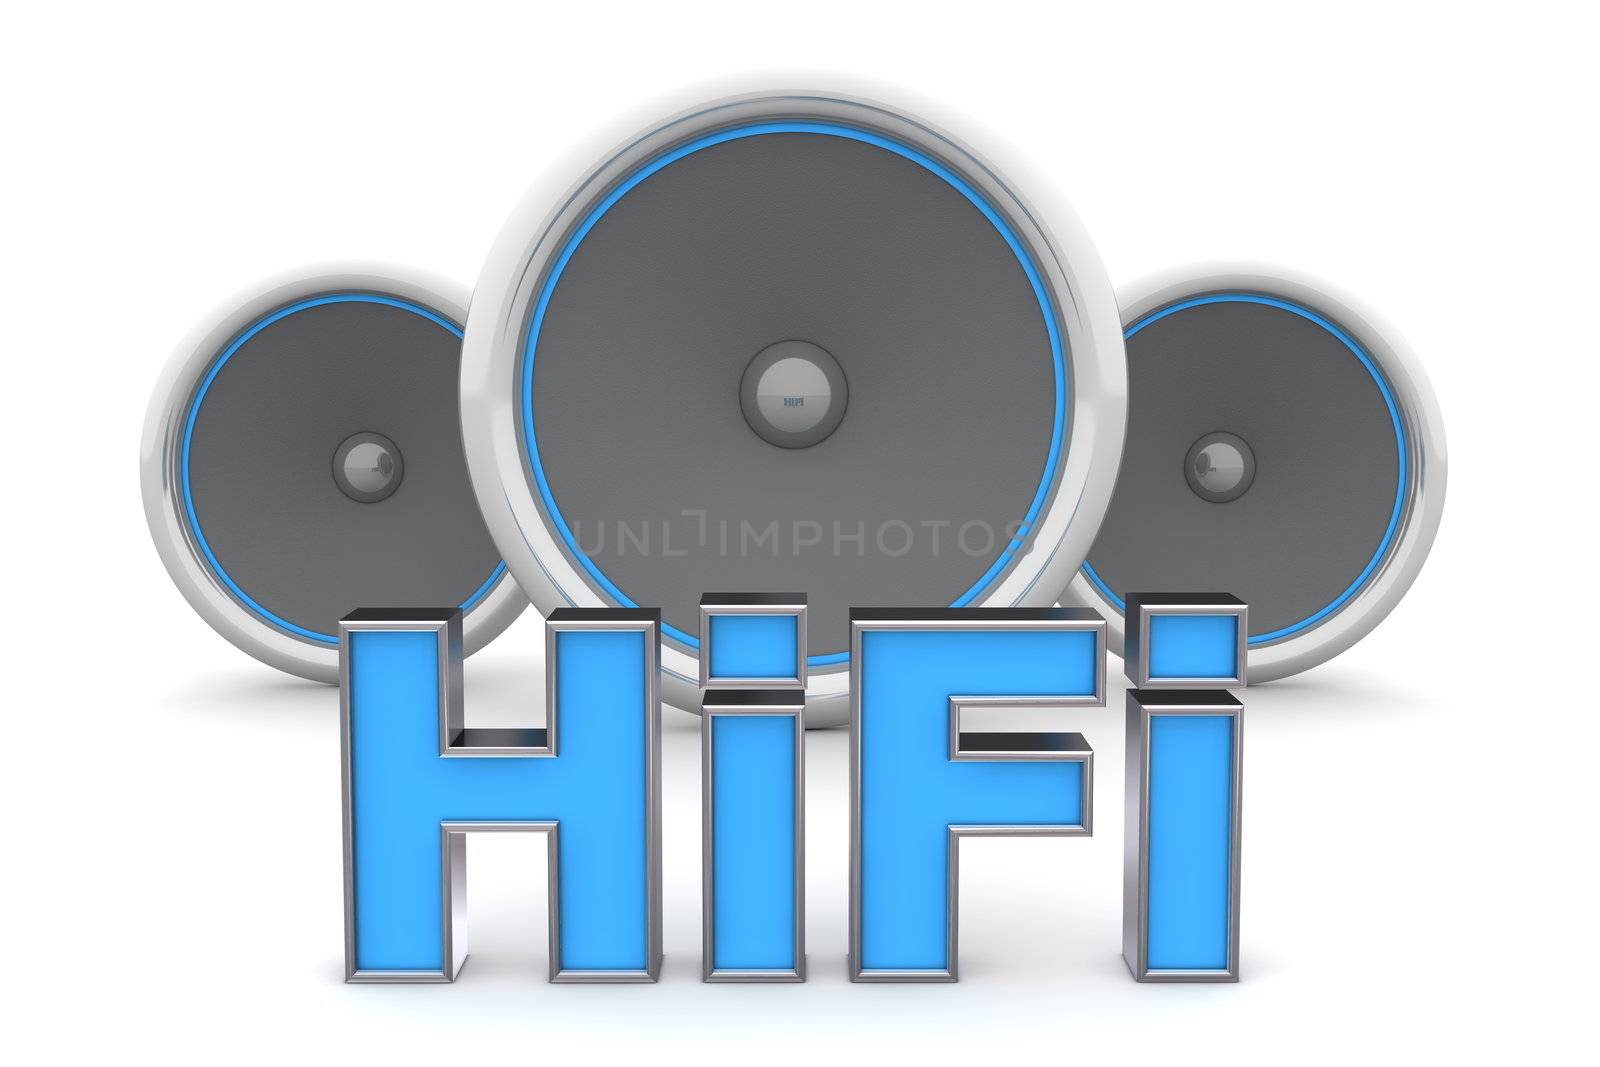 word HiFi with three speakers in background - blue